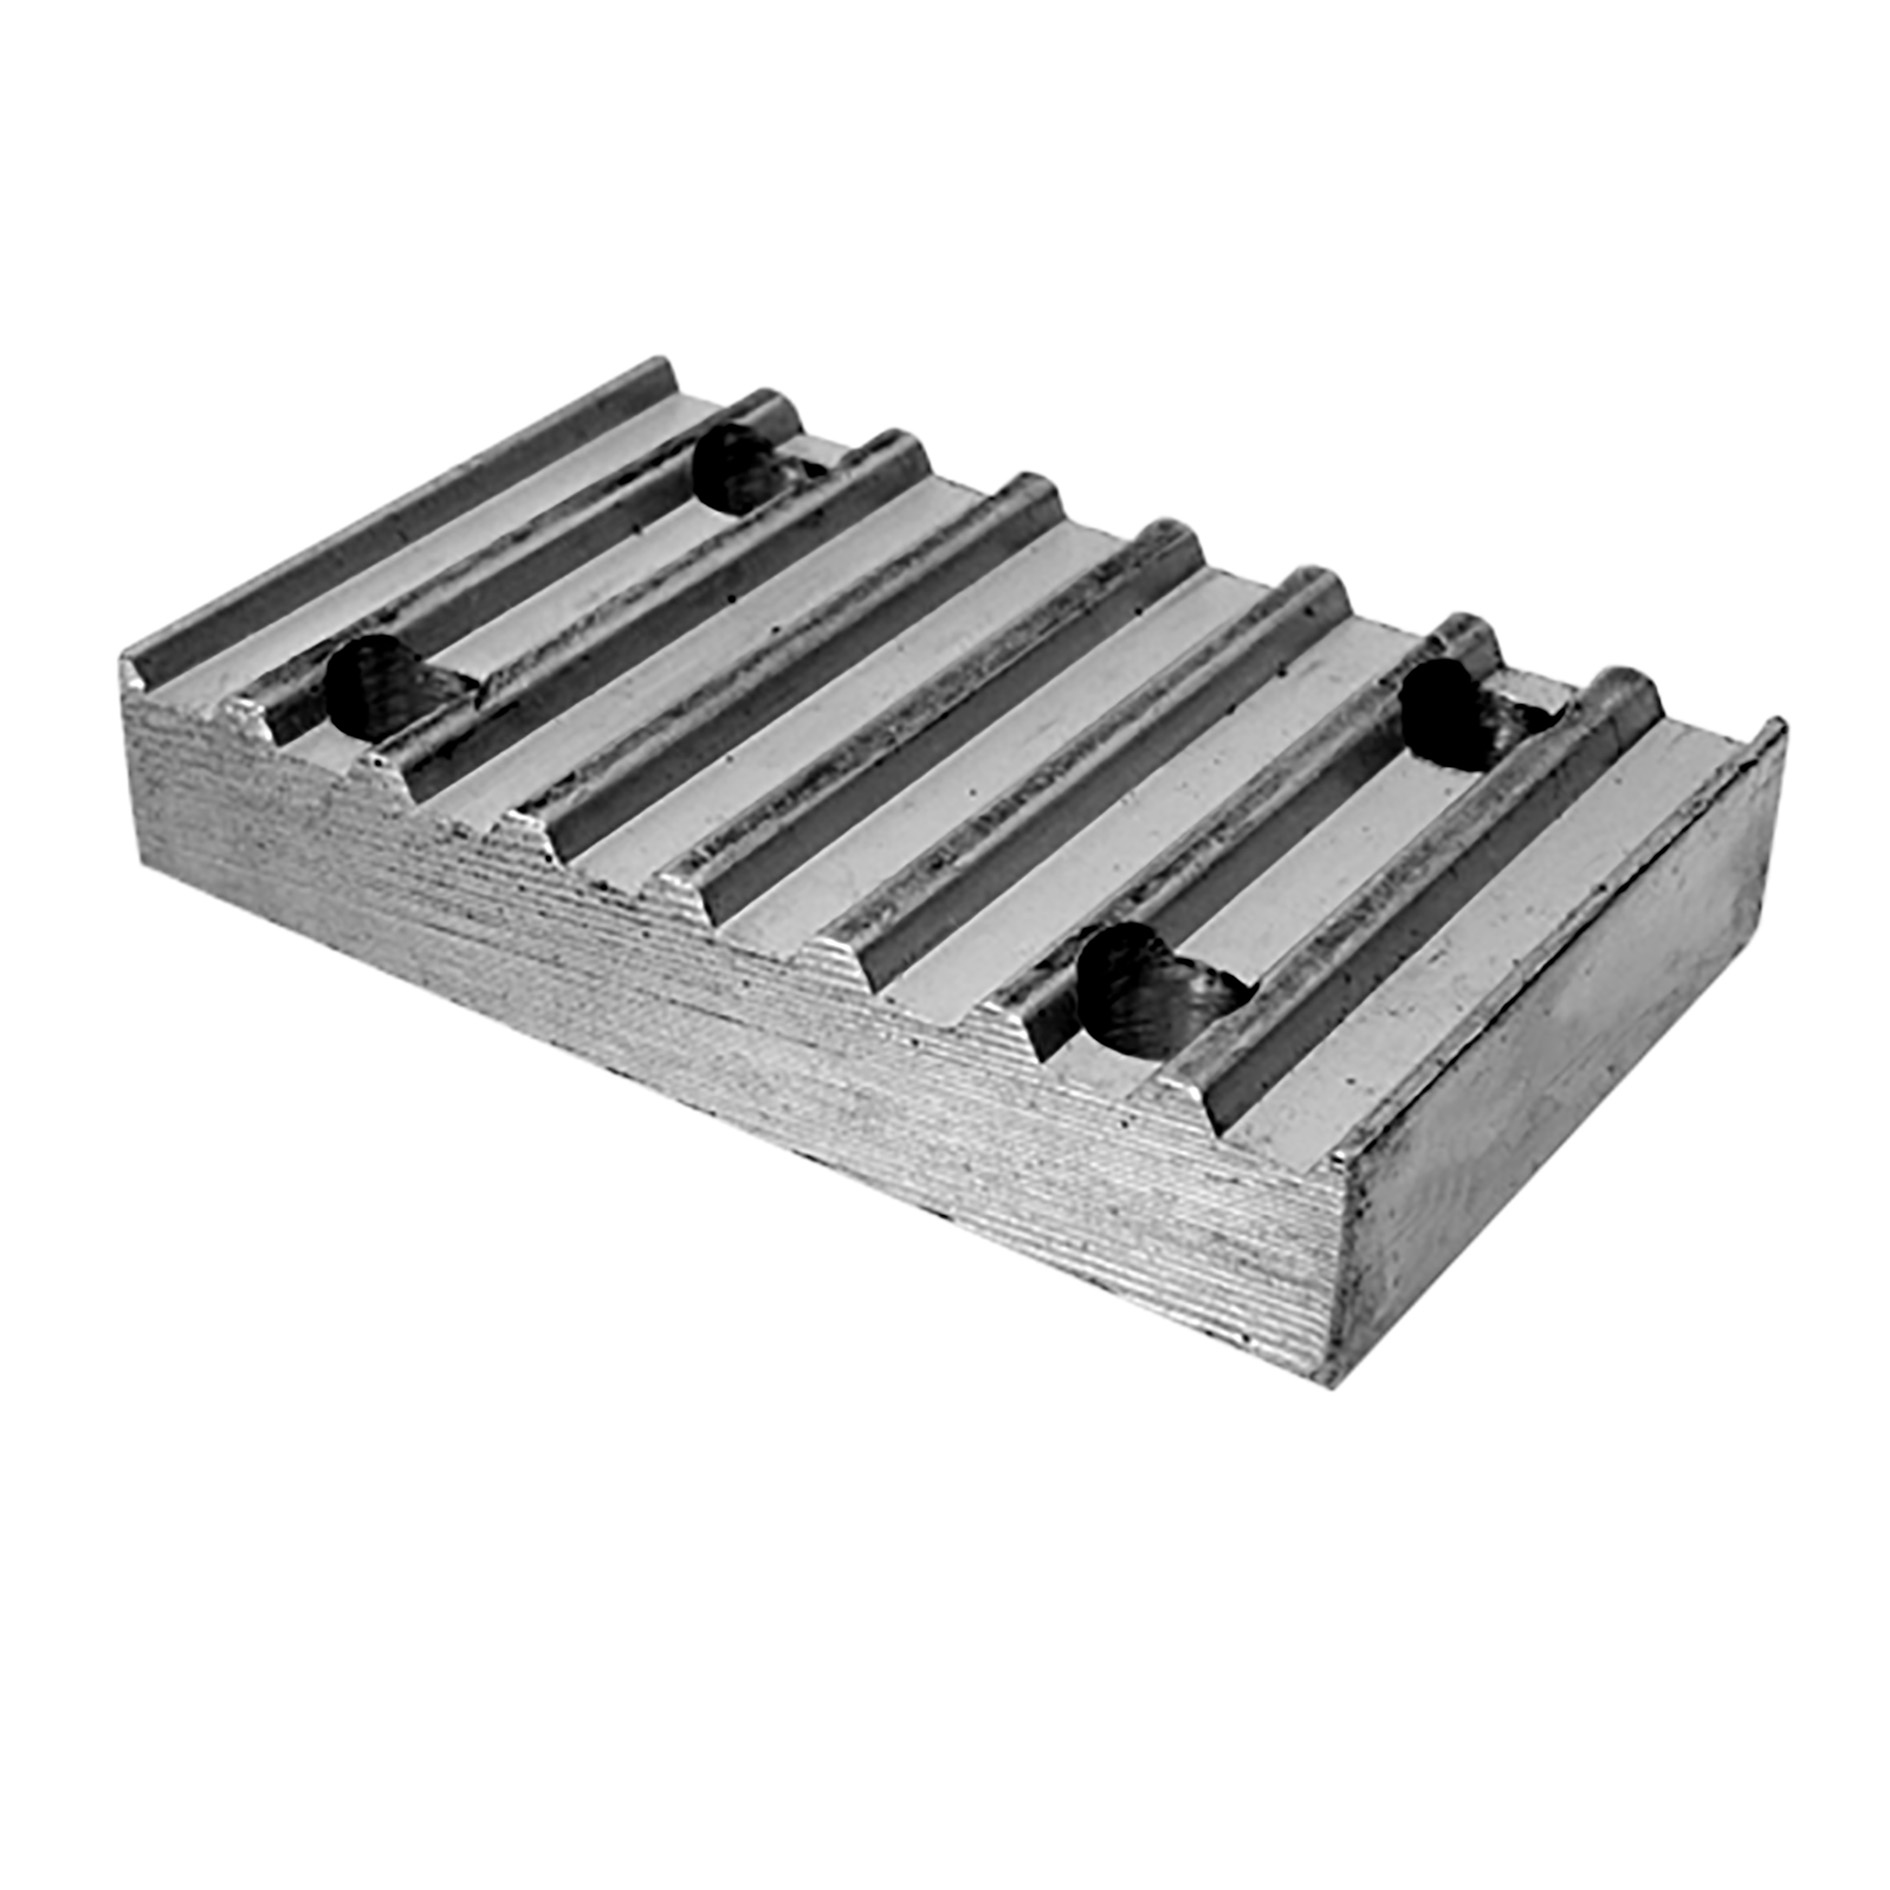 Connecting plate for RPP type timing belts - RPP14 - 55mm - RPP